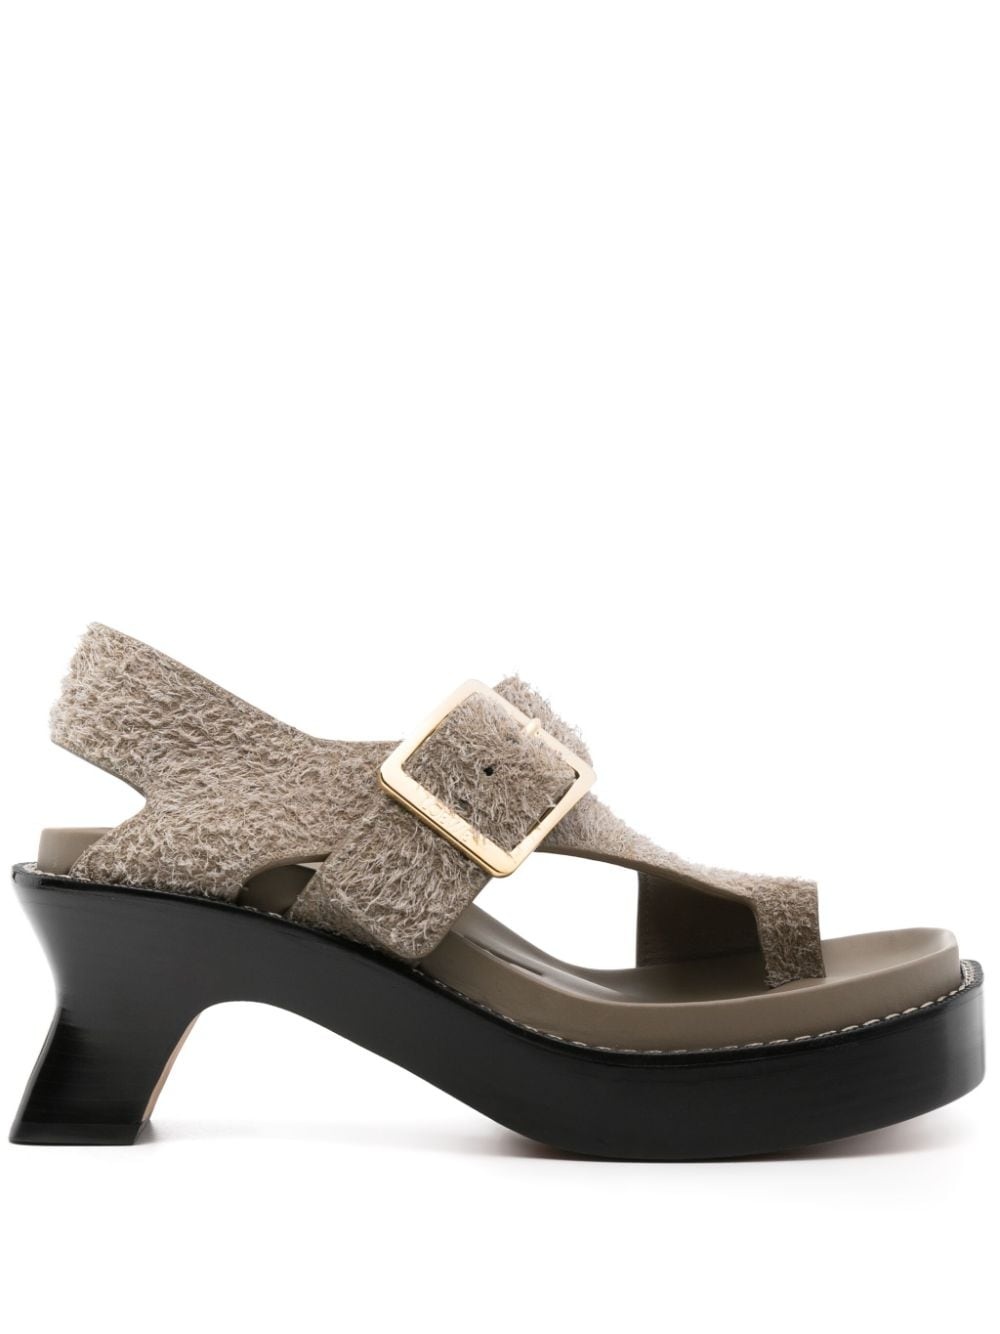 Ease 90mm suede sandals - 1